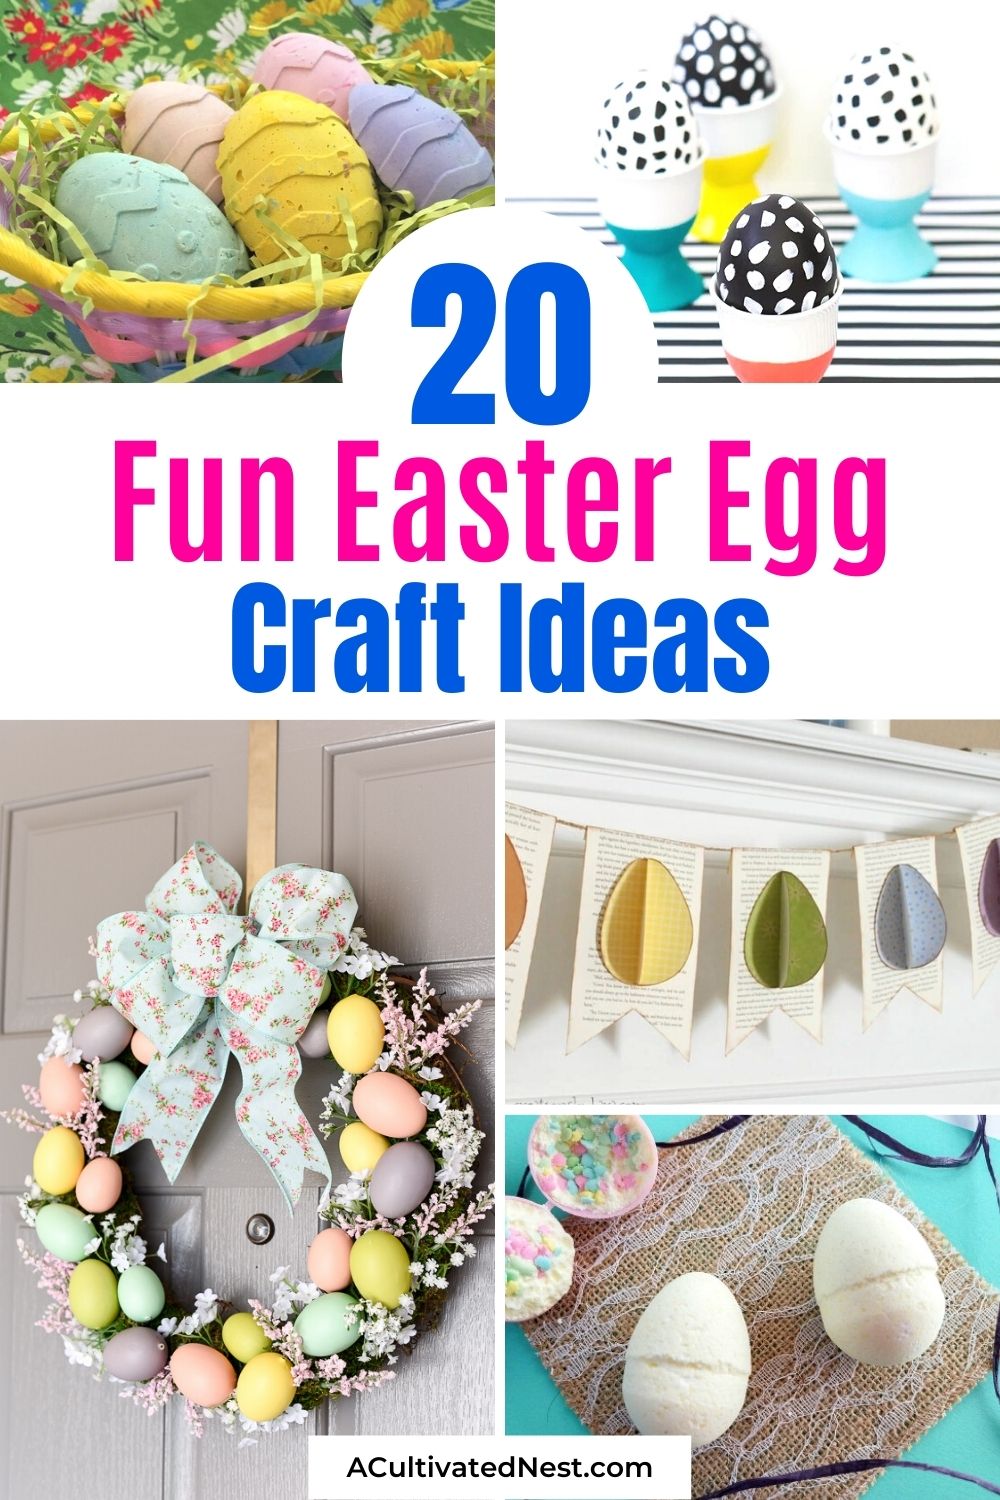 20 Fun Easter Egg Crafts- Bring some color and joy to your home during Easter time with these fun Easter egg craft ideas! Some of these would make great gifts! | #EasterDIY #DIY #EasterCraft #EasterDecor #ACultivatedNest